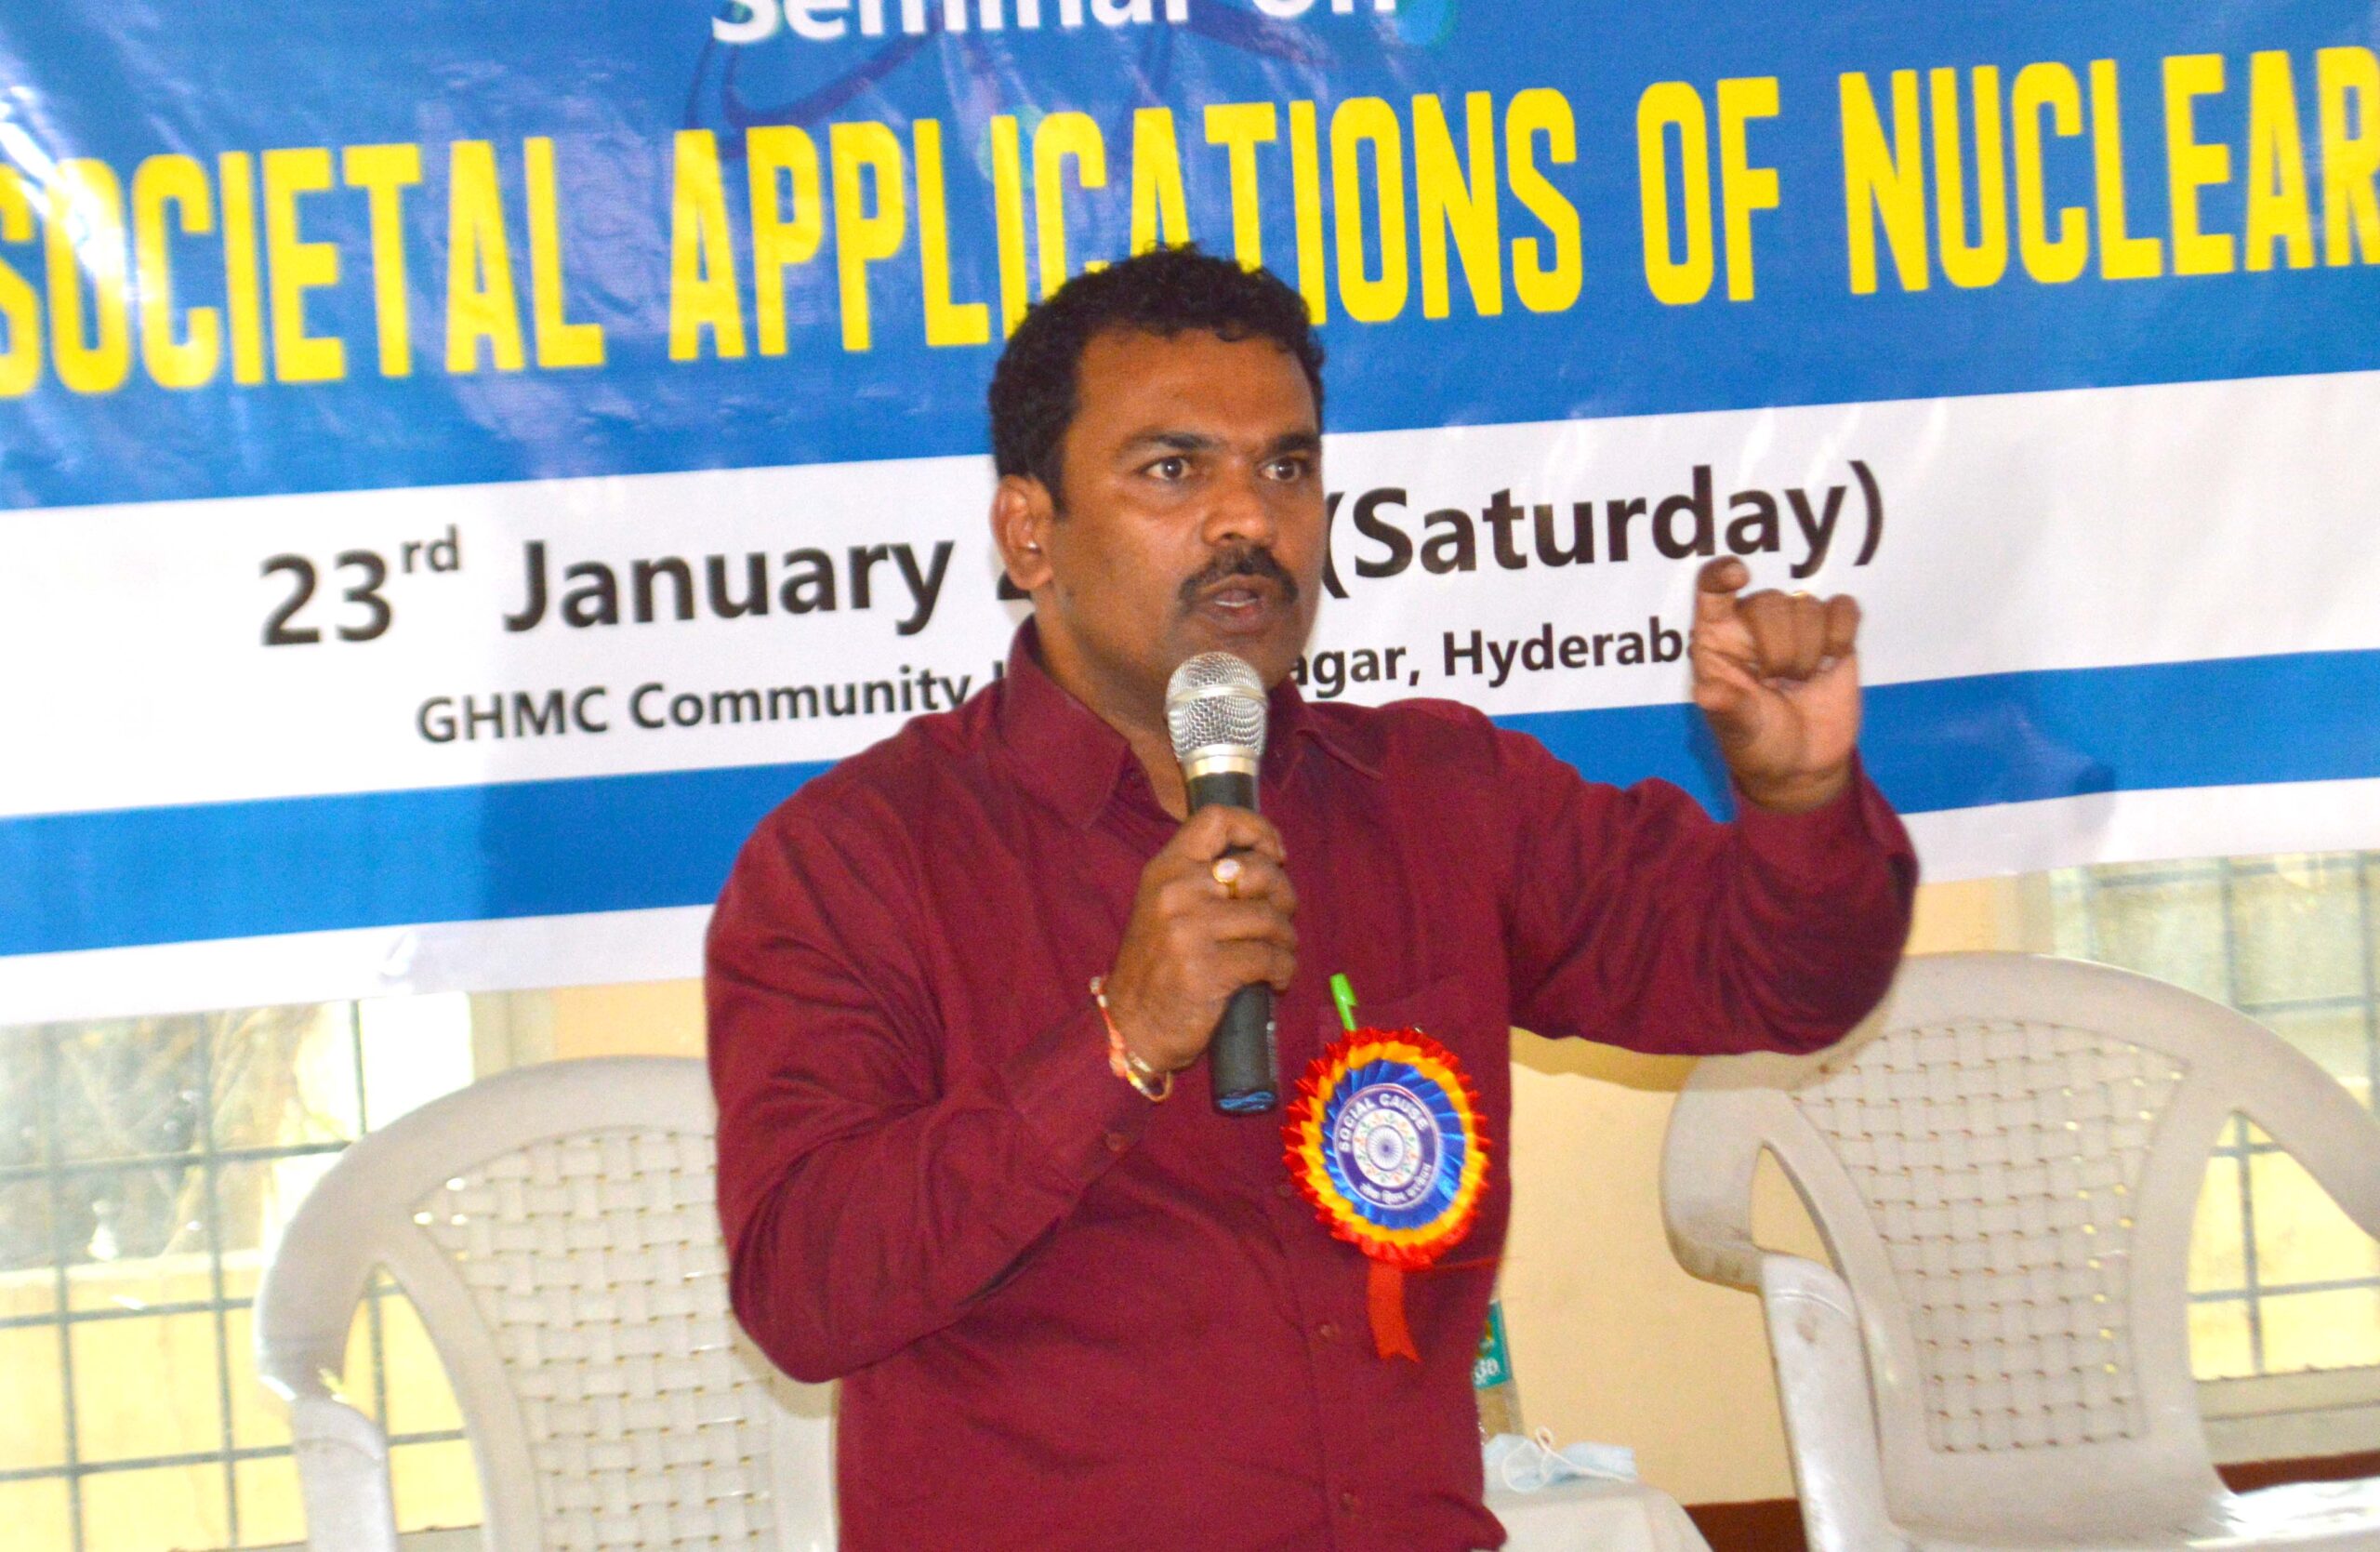 Dr. Thirumalesh Keesari at the seminar on Peaceful and Societal Applications of Nuclear Energy organised by Social Cause